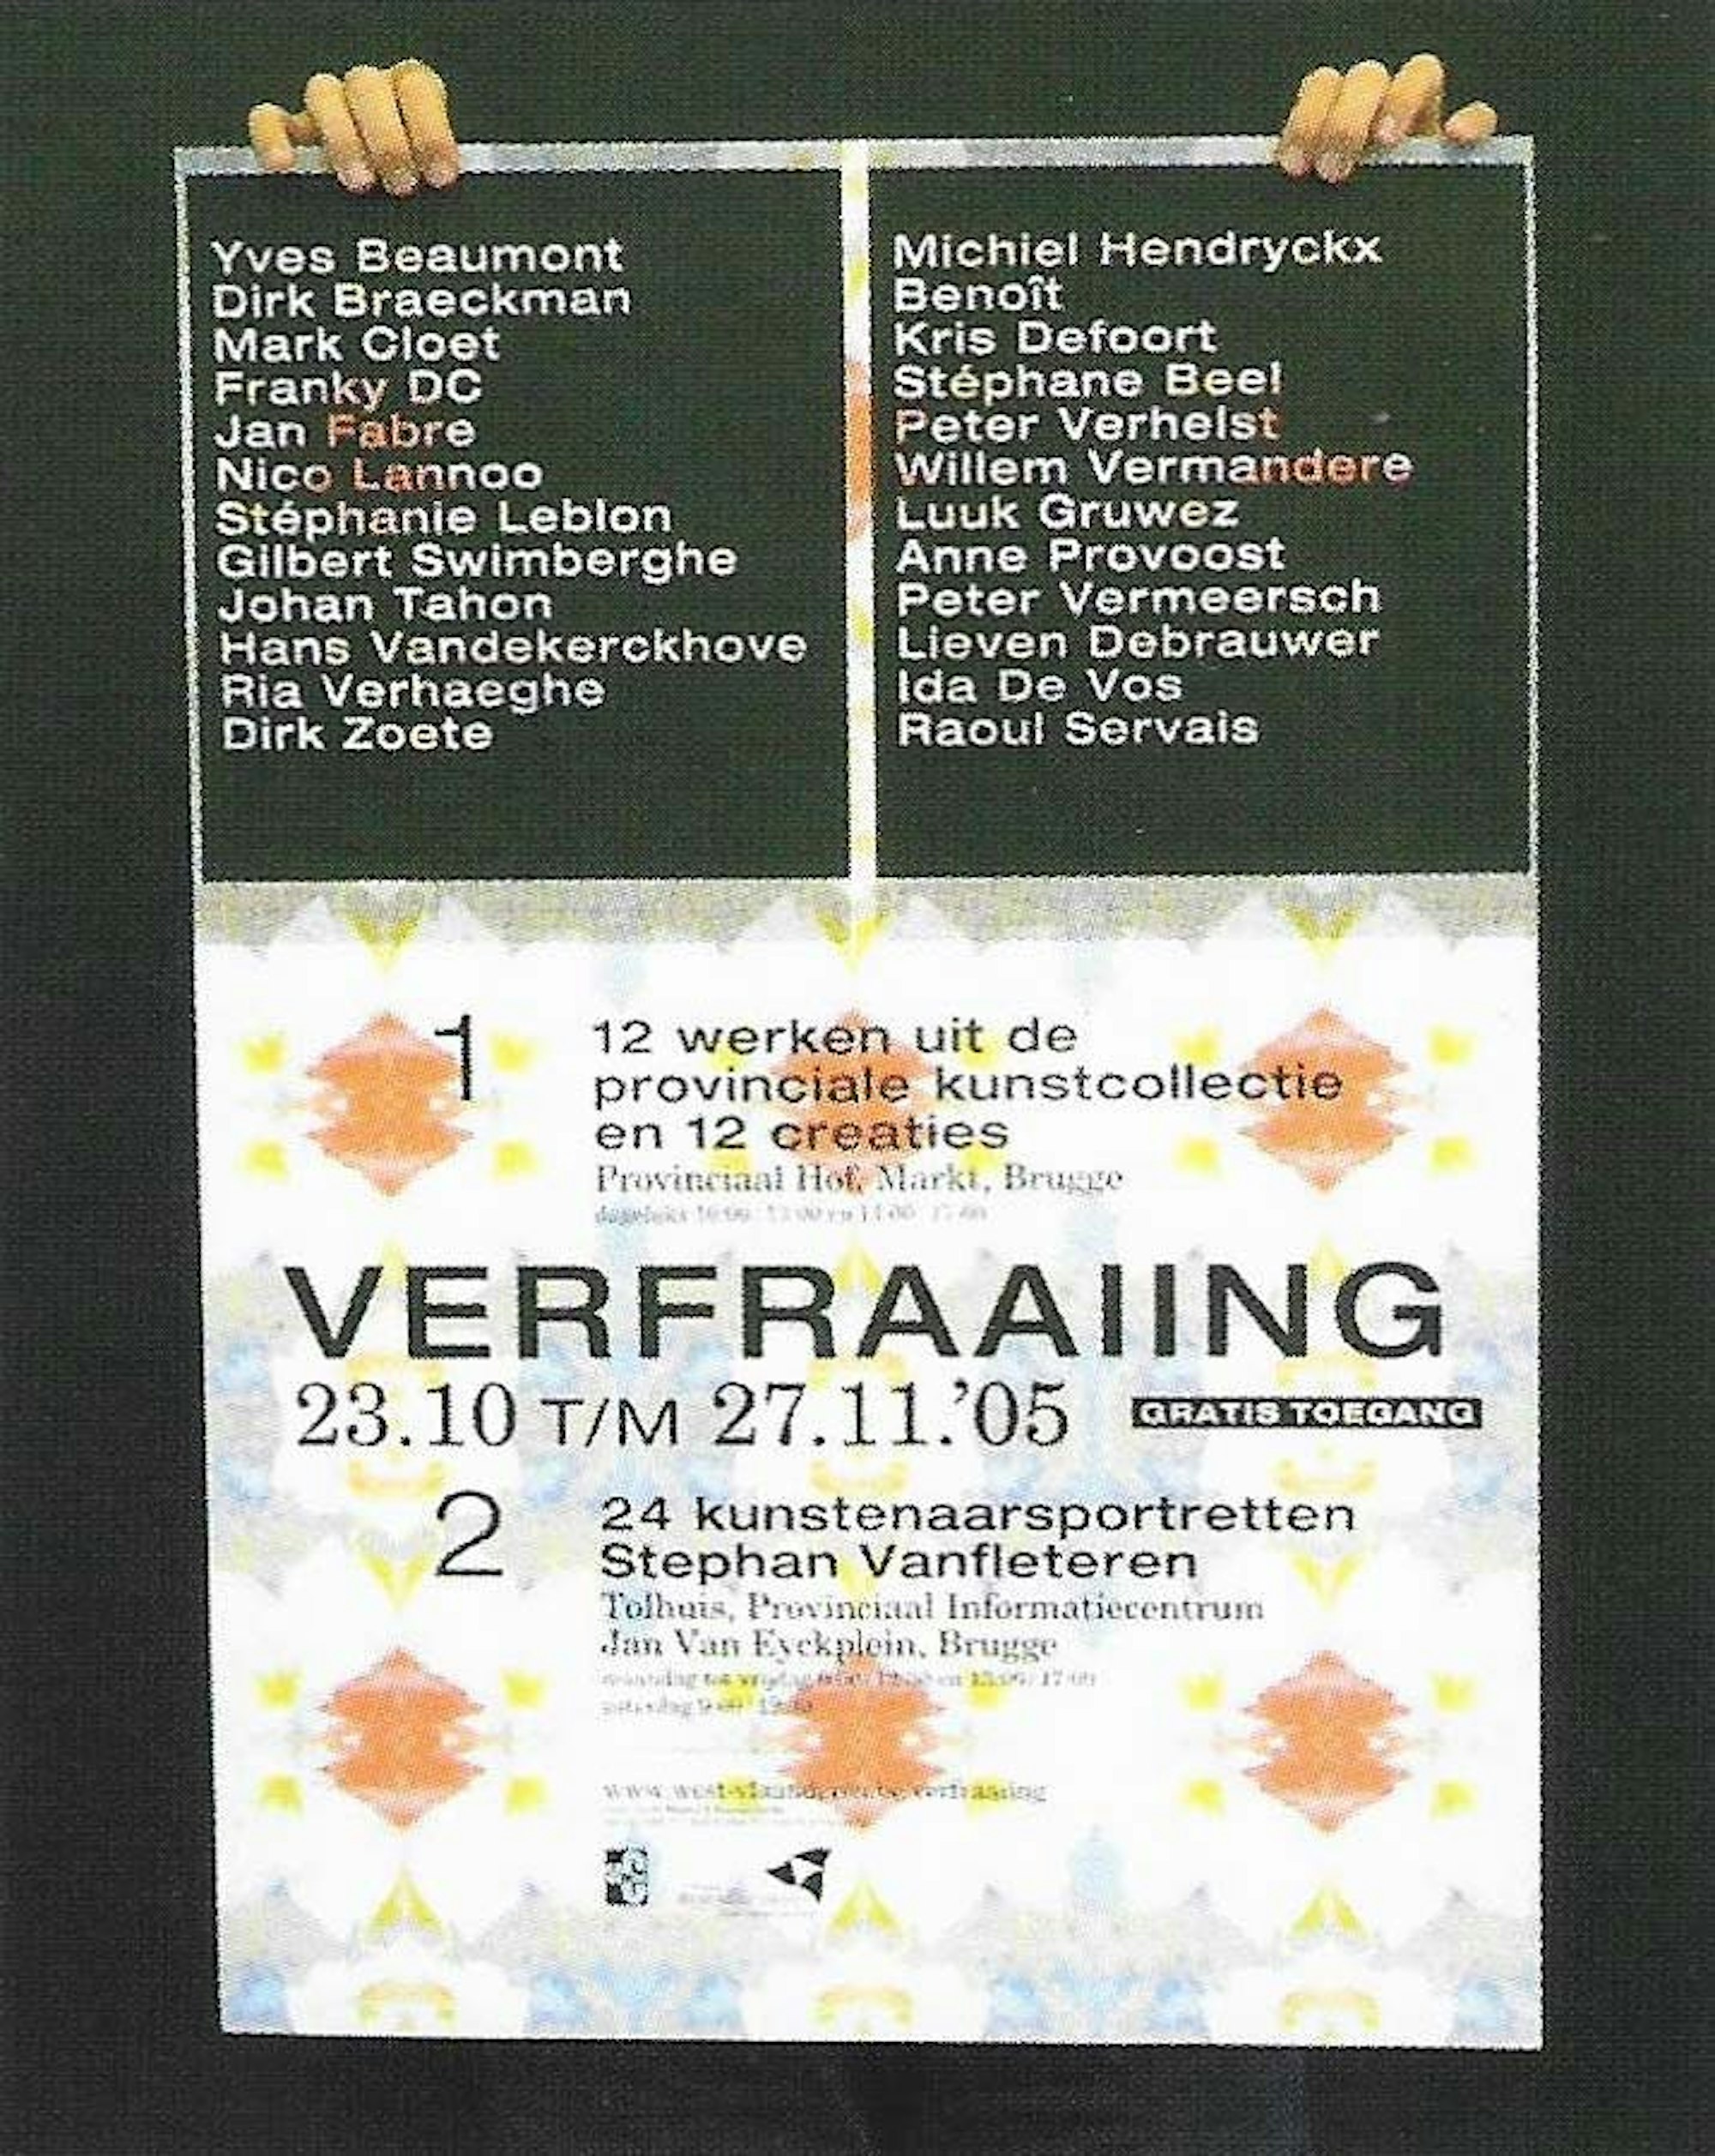 Design & concept catalogue, poster and invitation for exhibition 'verfraaiing', July 2005